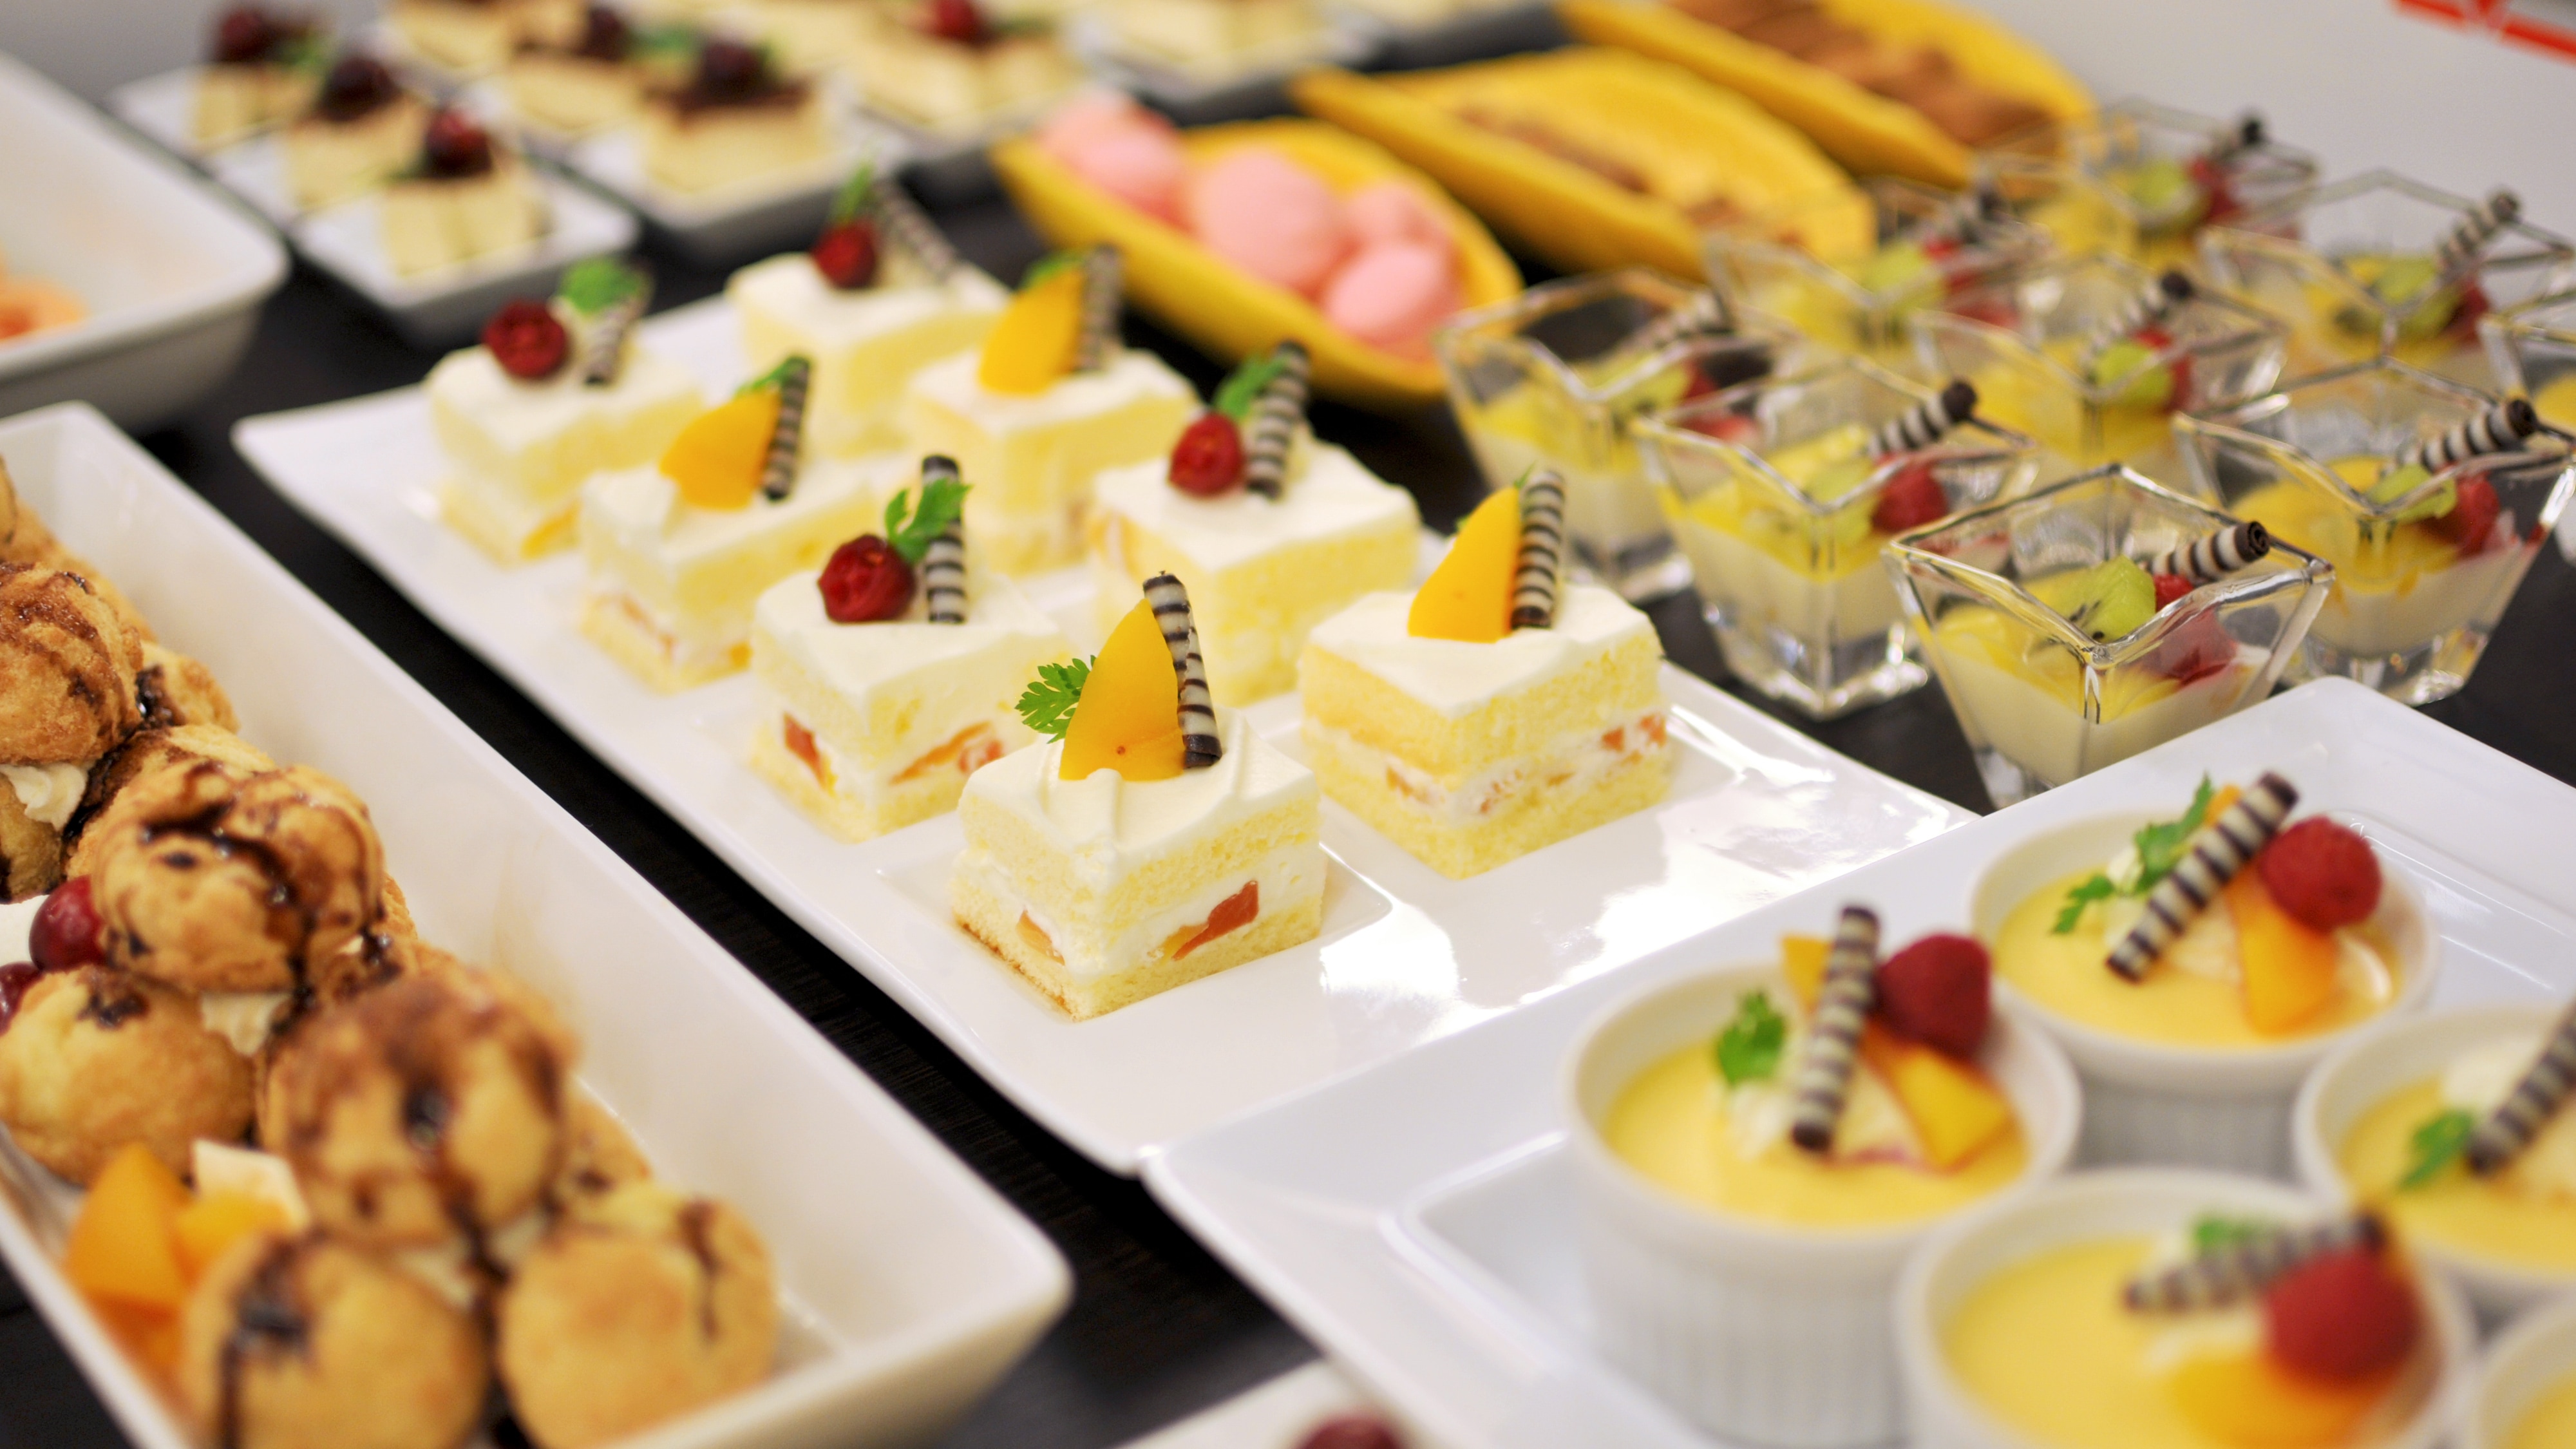 A dessert buffet that is very popular with women and children.